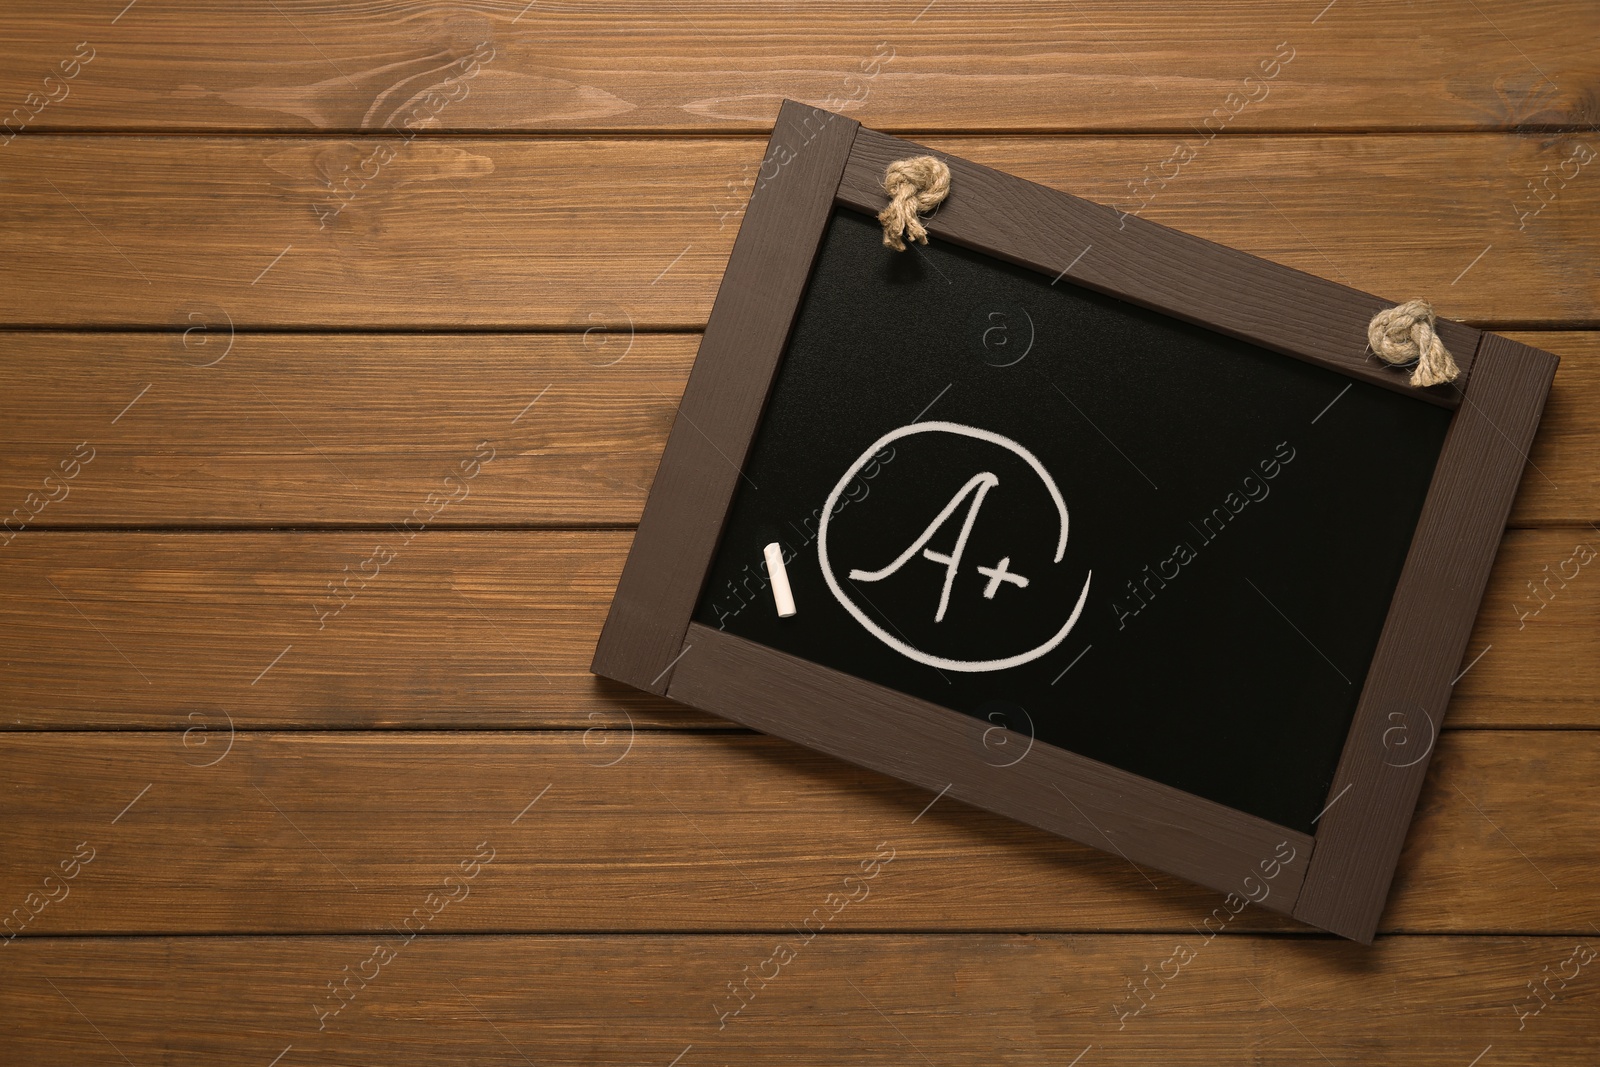 Image of School grade. Small blackboard with chalked letter A and plus symbol on wooden background, top view